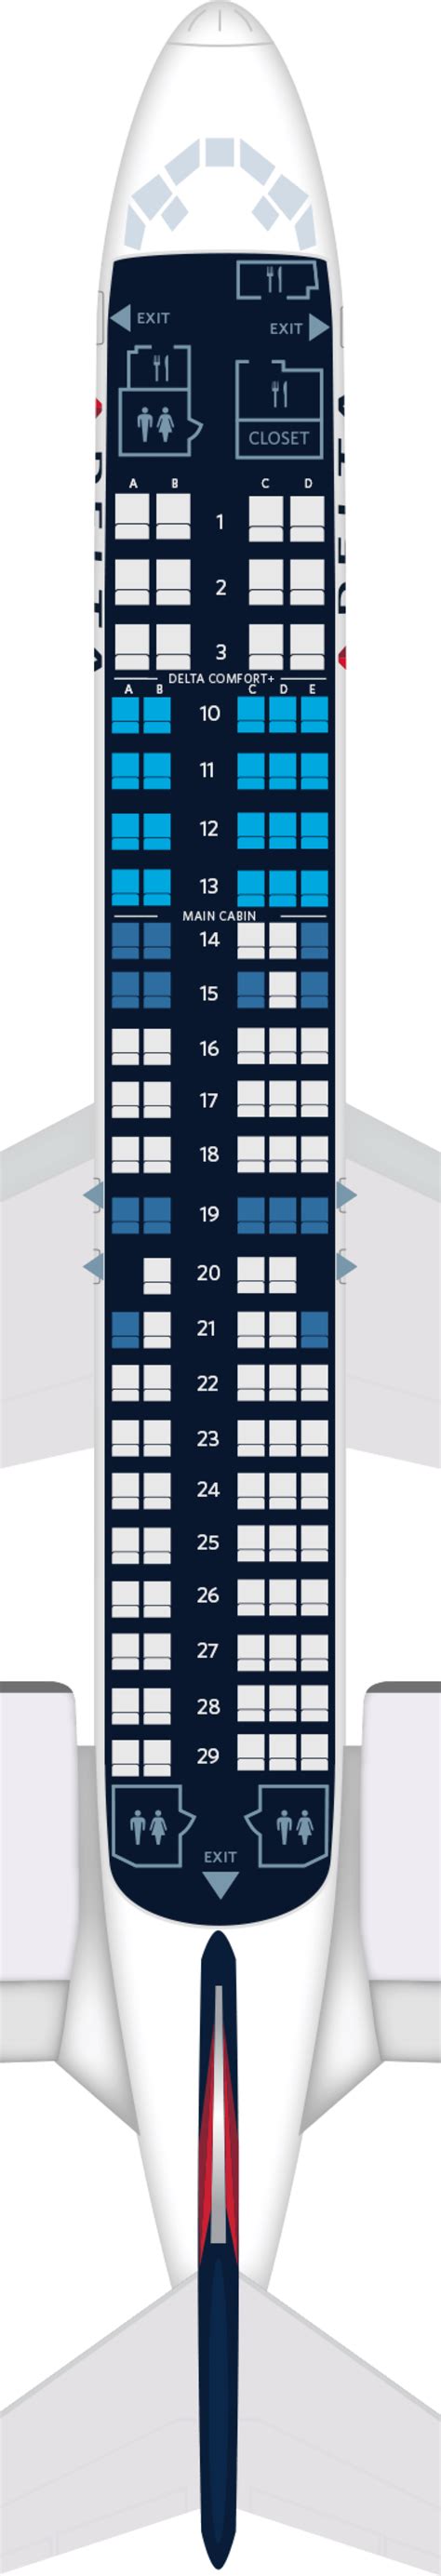 boeing 717 seating chart delta